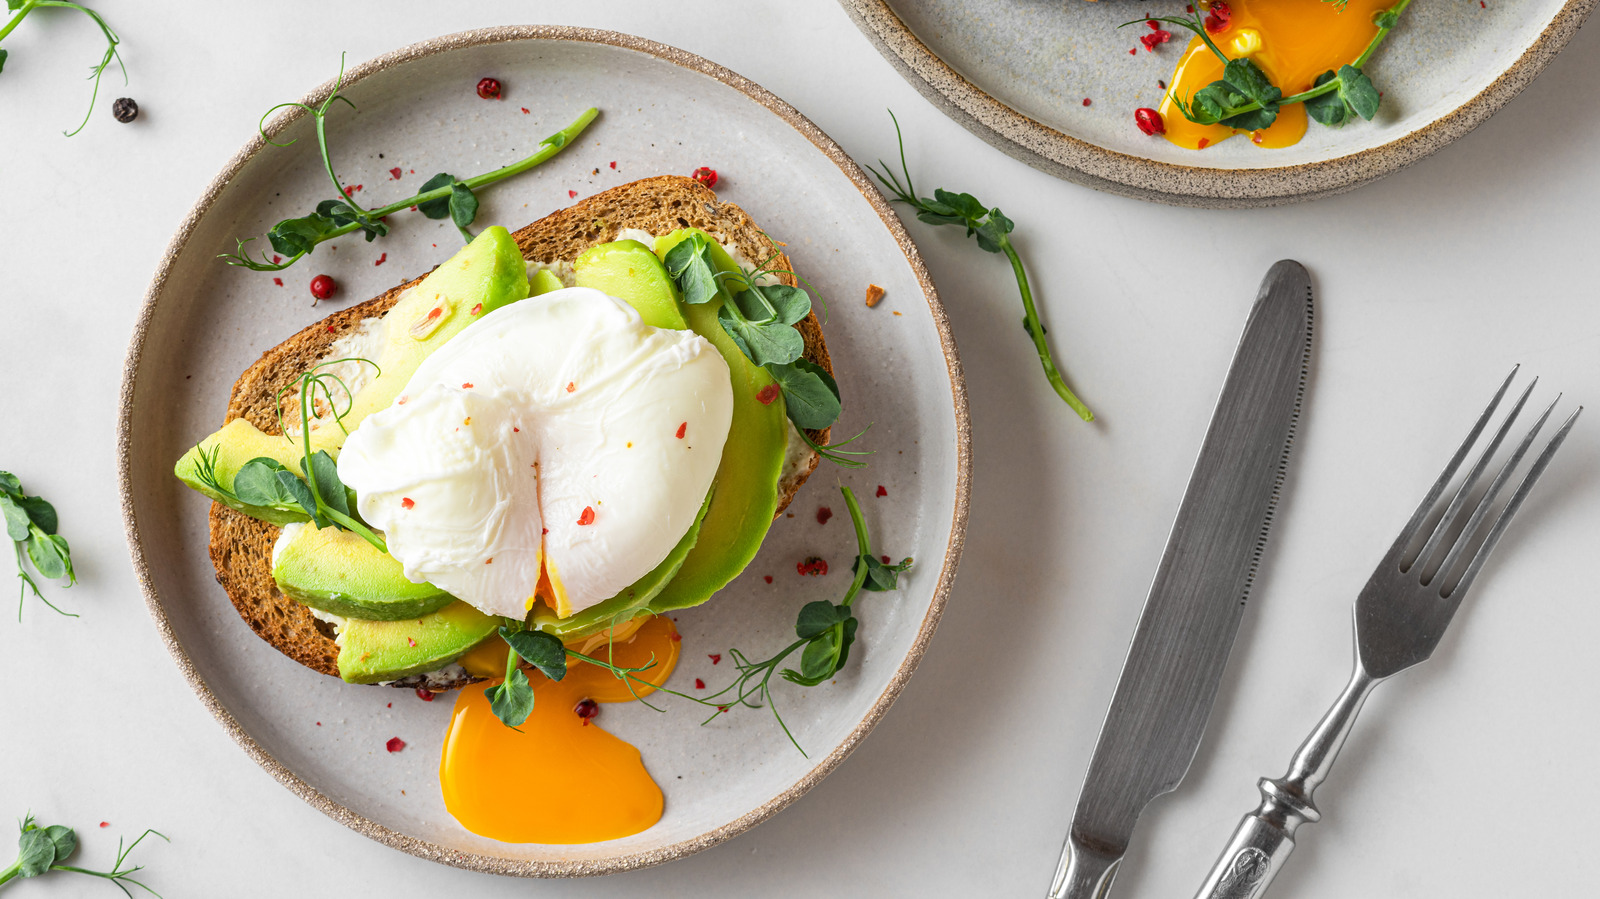 https://www.mashed.com/img/gallery/how-to-make-the-best-poached-egg-every-single-time/l-intro-1698005361.jpg